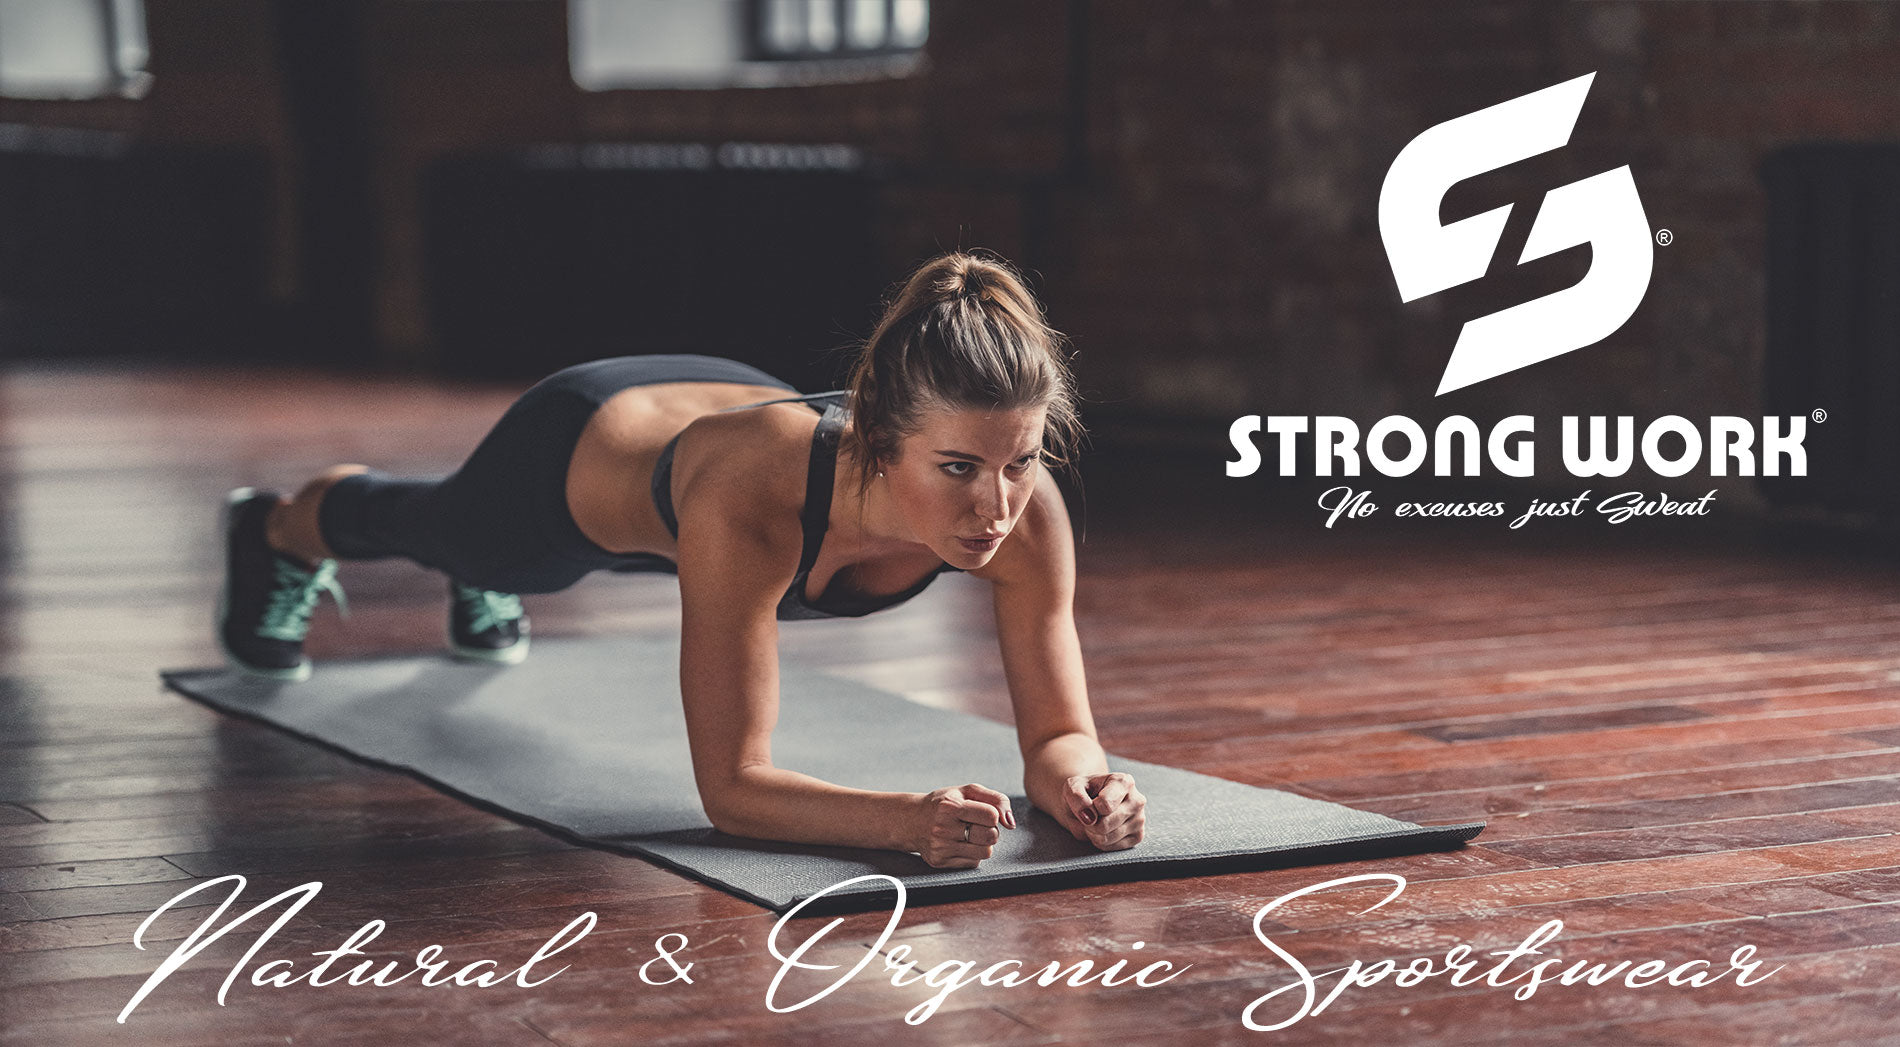 Les exercices de gainage - Strong Work Sportswear